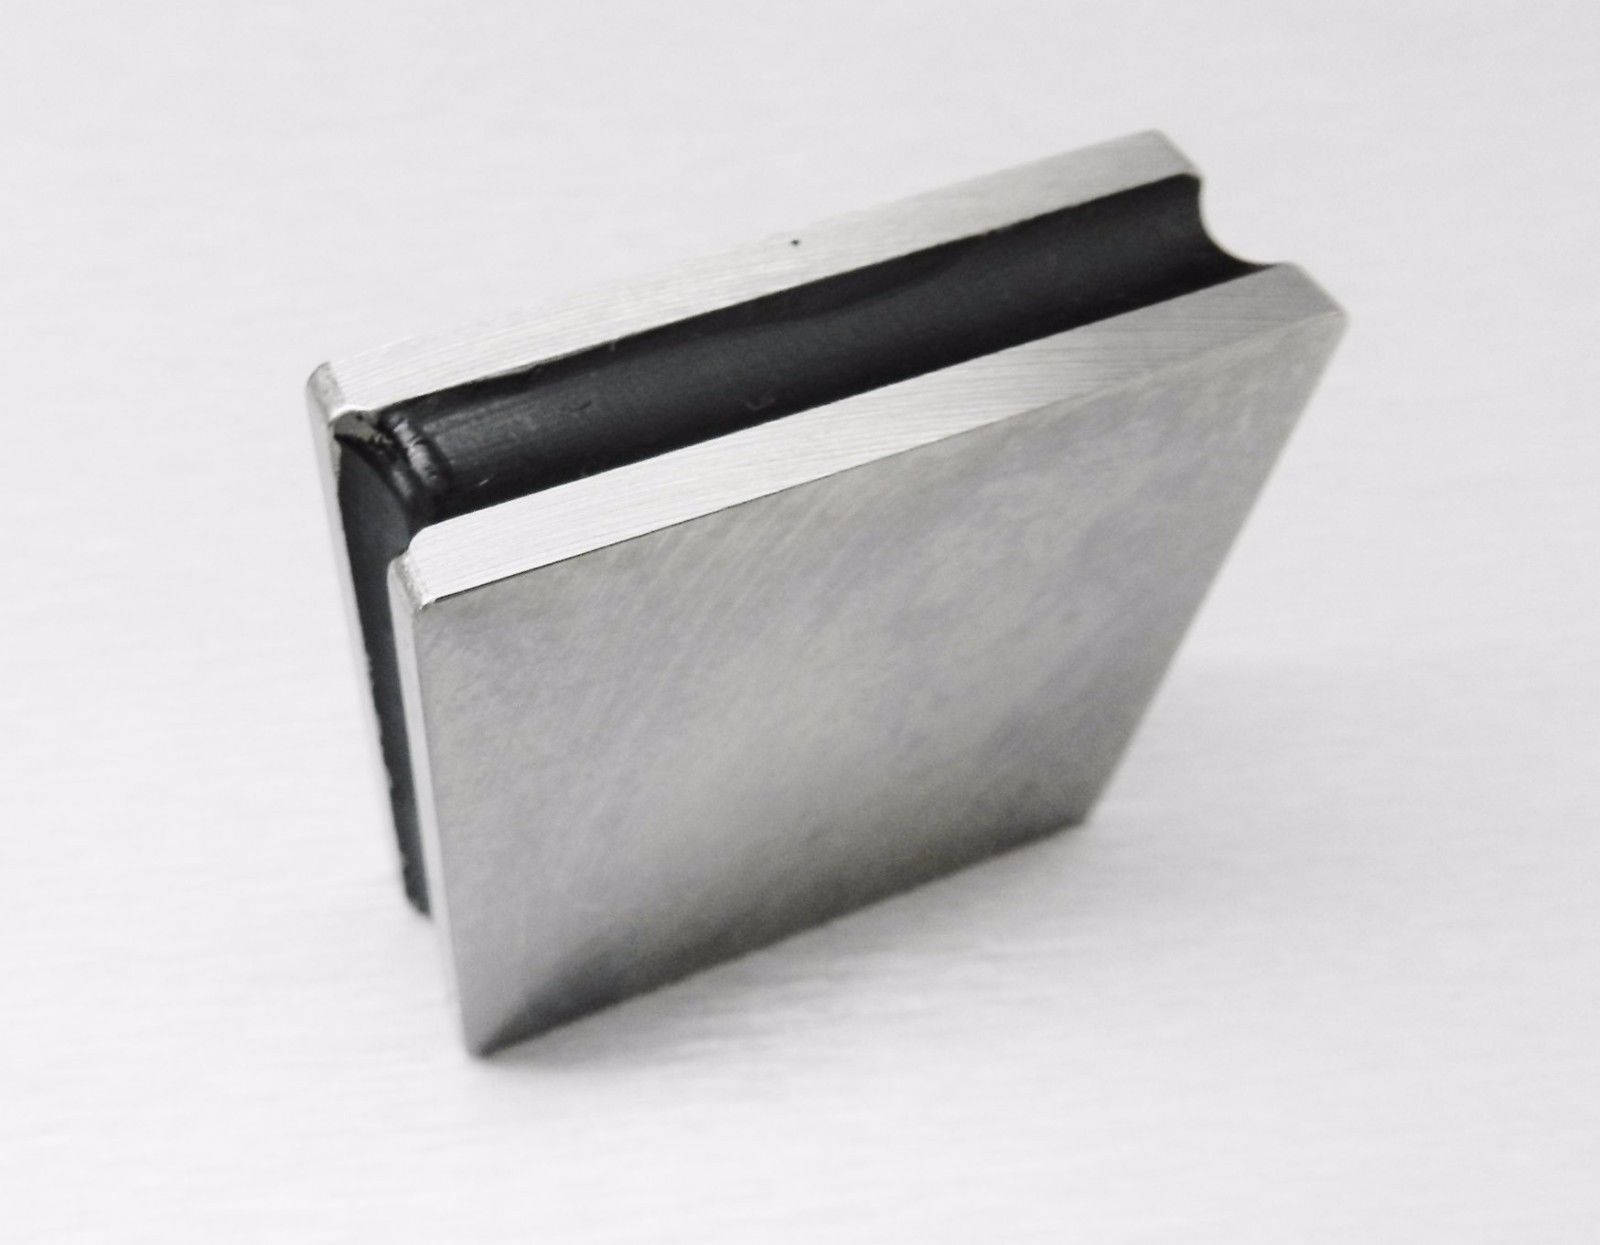 JTS Jewelry 2-1/2 Square Steel Bench Block Flat Smooth Anvil Grooved Sides A1 Premium